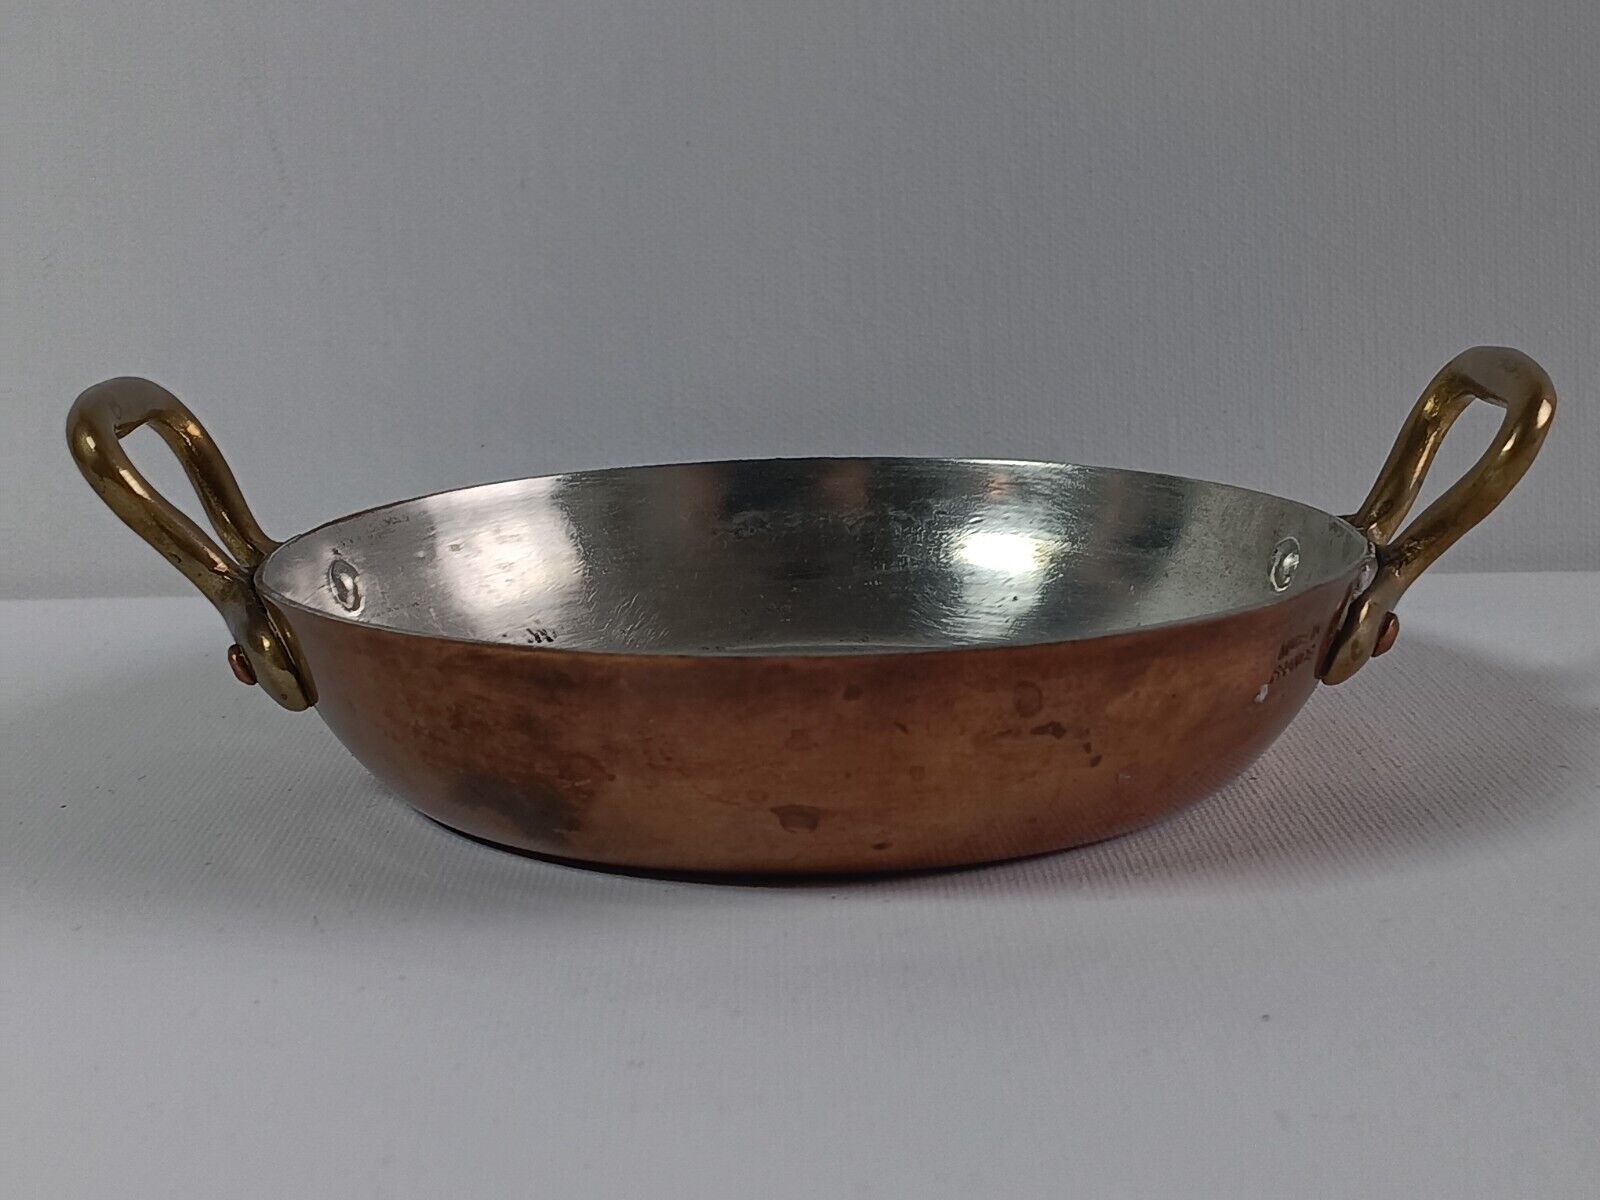 Vintage Copper Frence Small Egg Frying Pan Made in France Branding